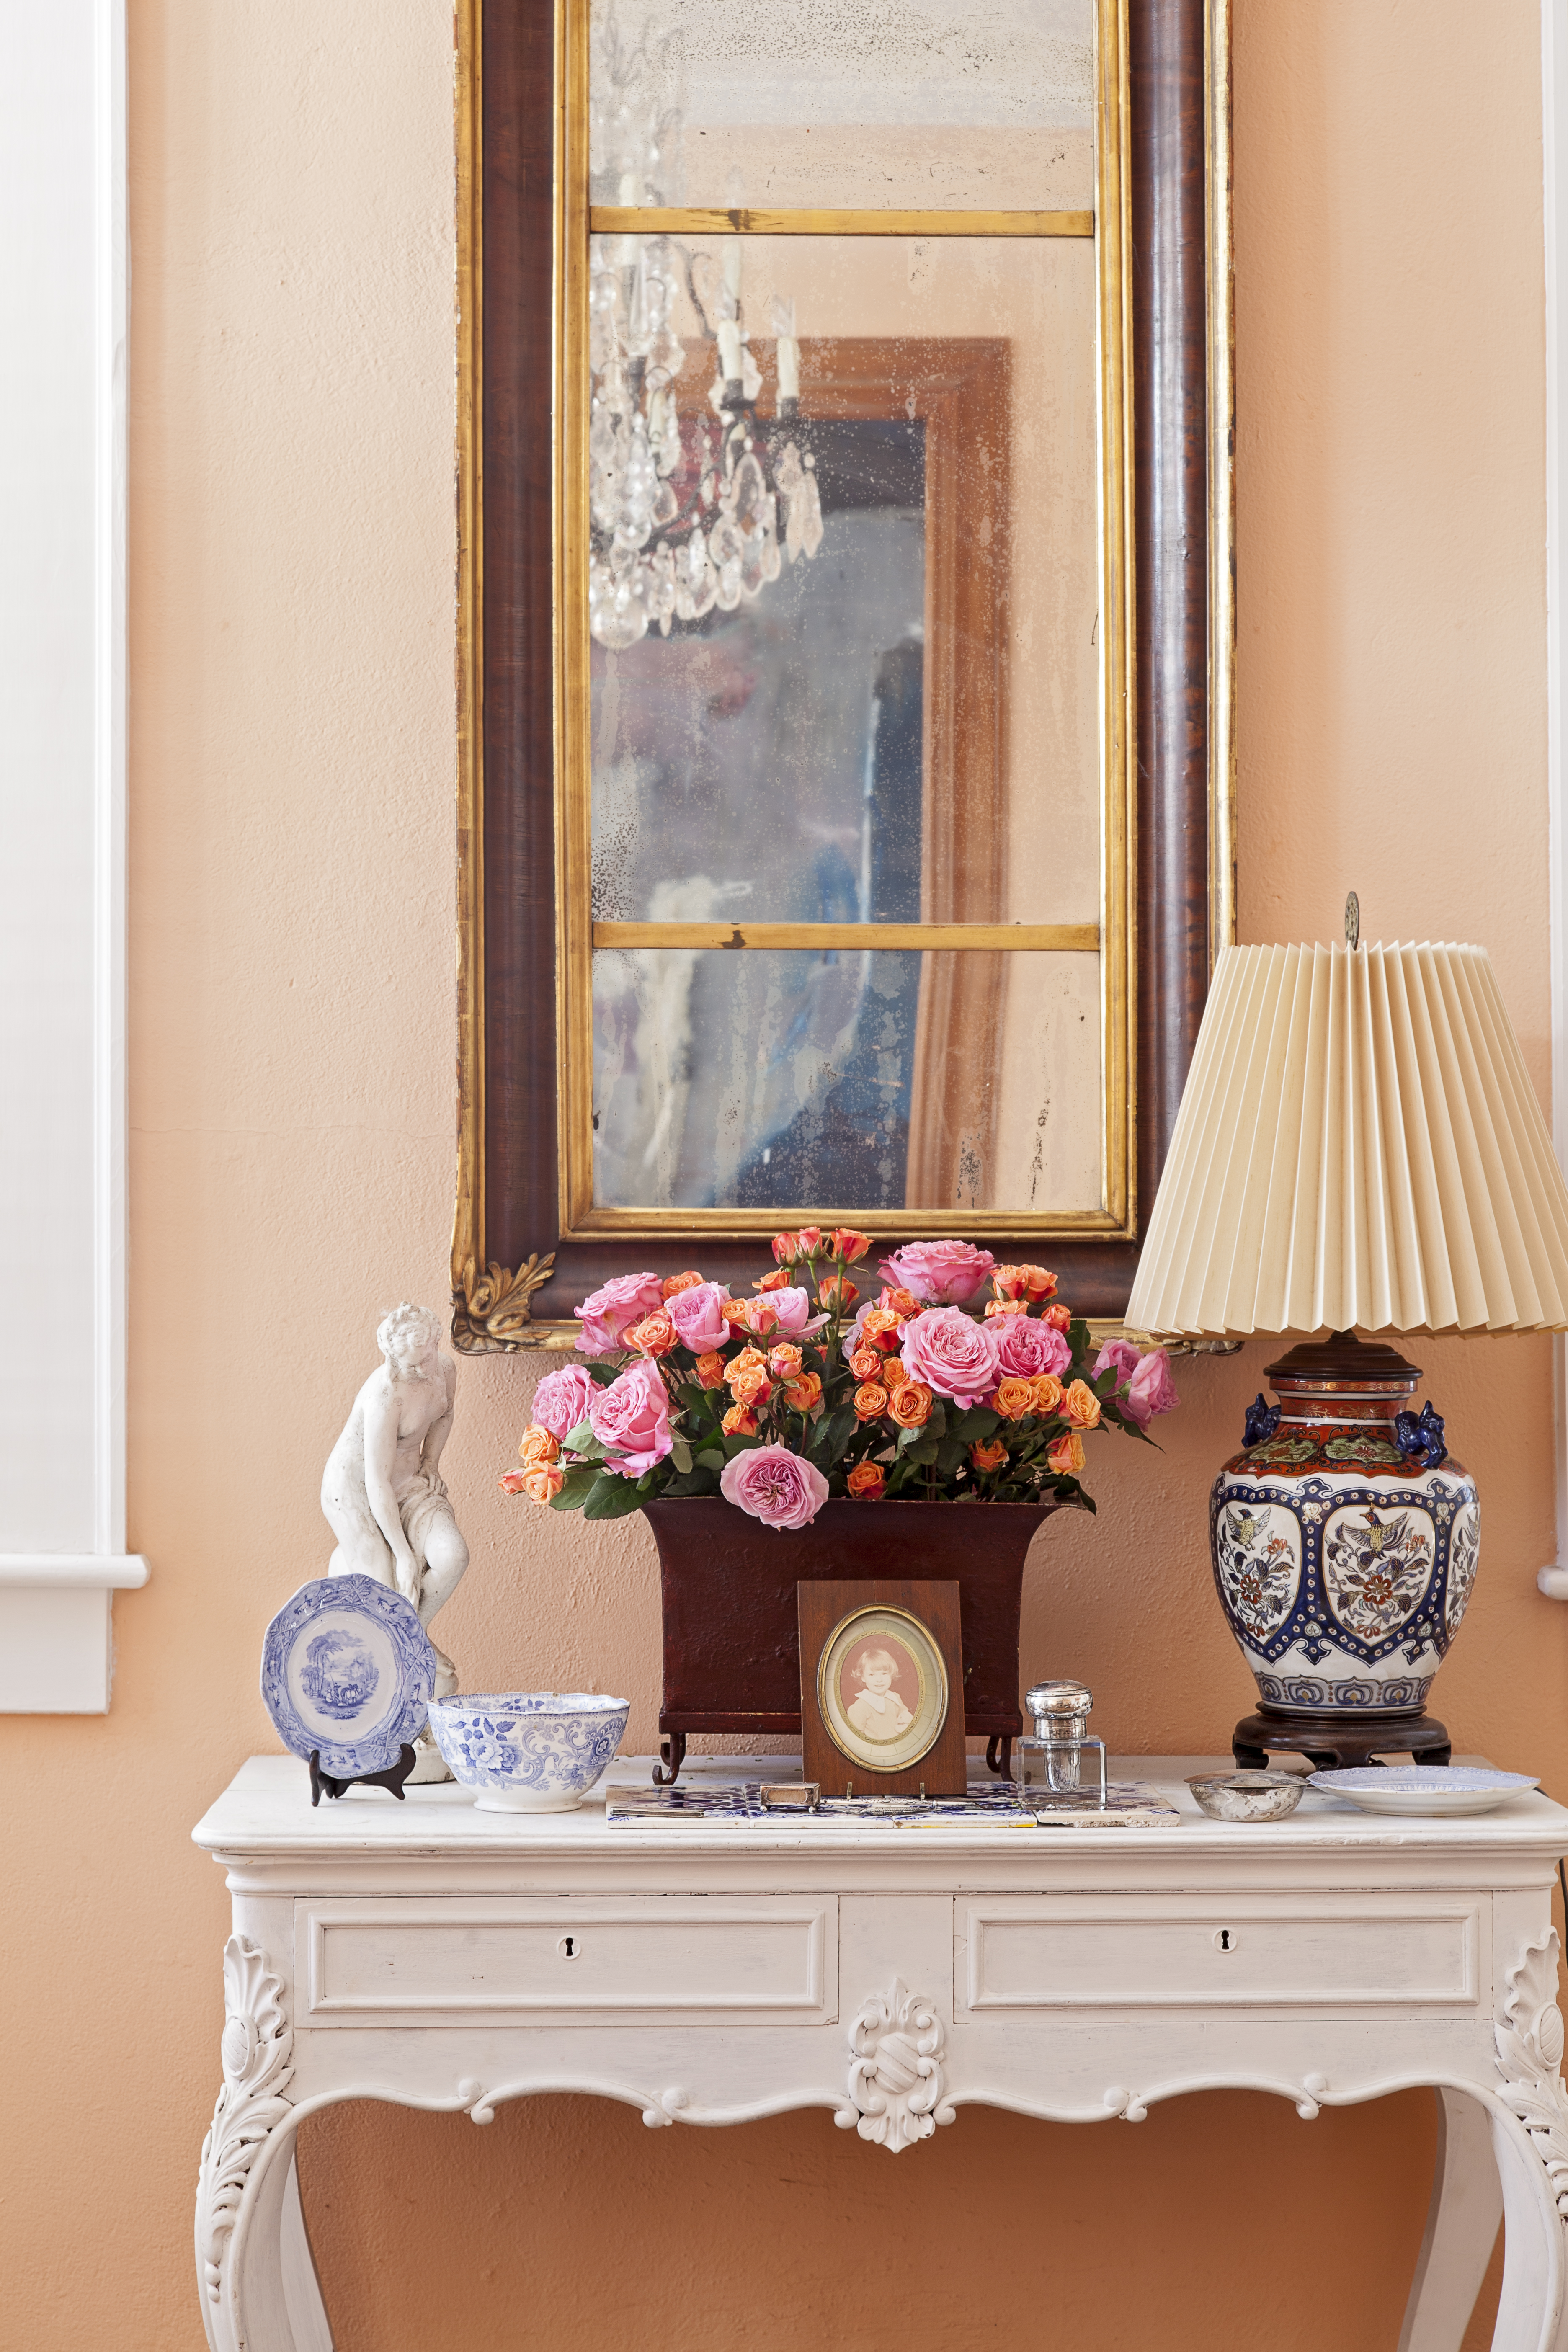 First Blush: This mirror is one of the first things Bigner purchased for the house; she liked how its height complemented the ceilings.